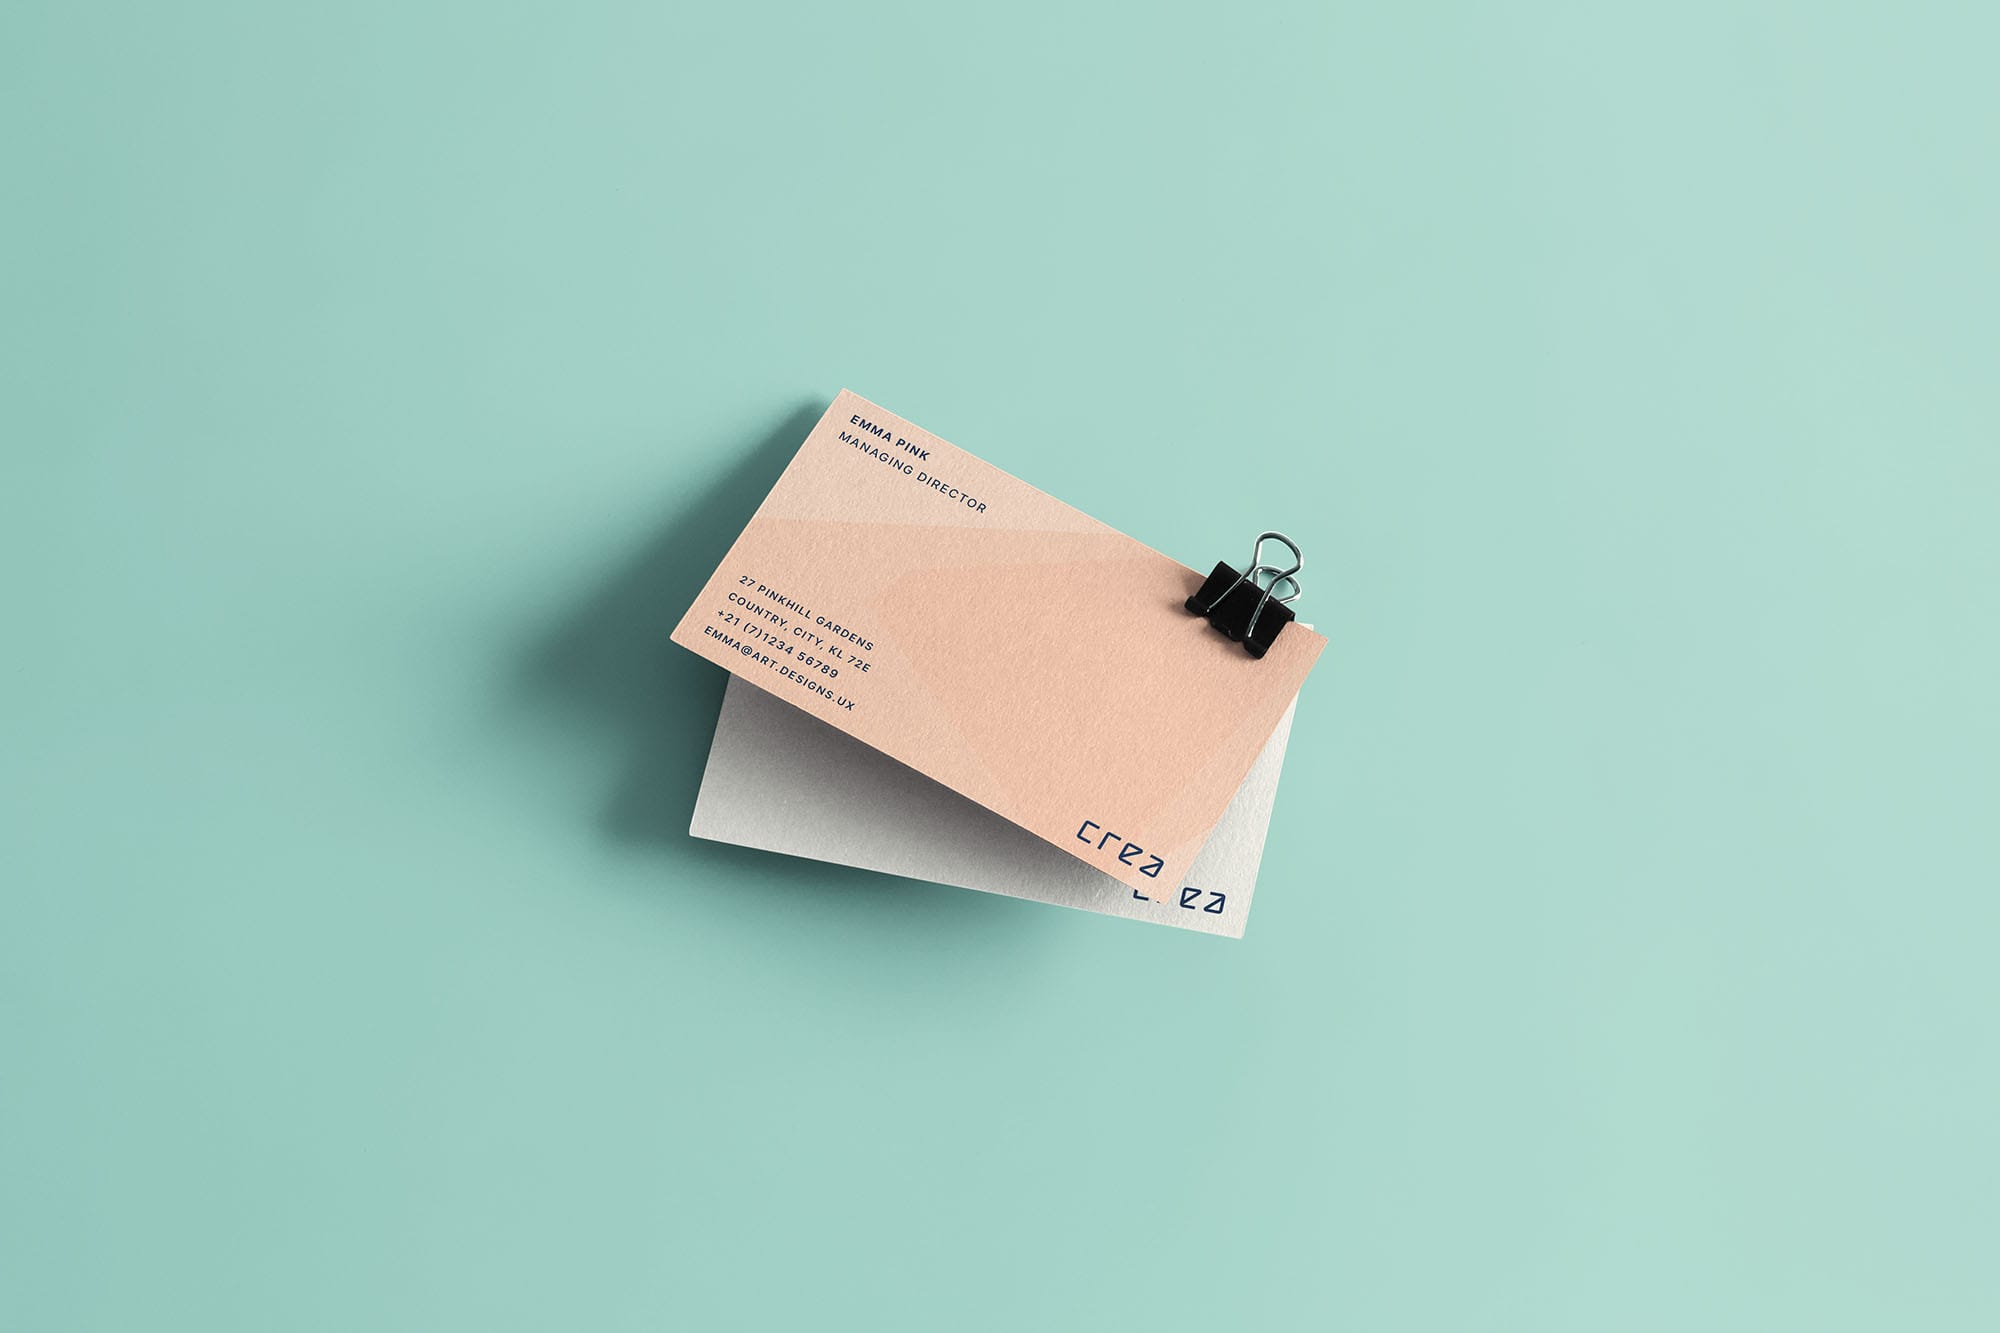 A free business card in binder clips mockup